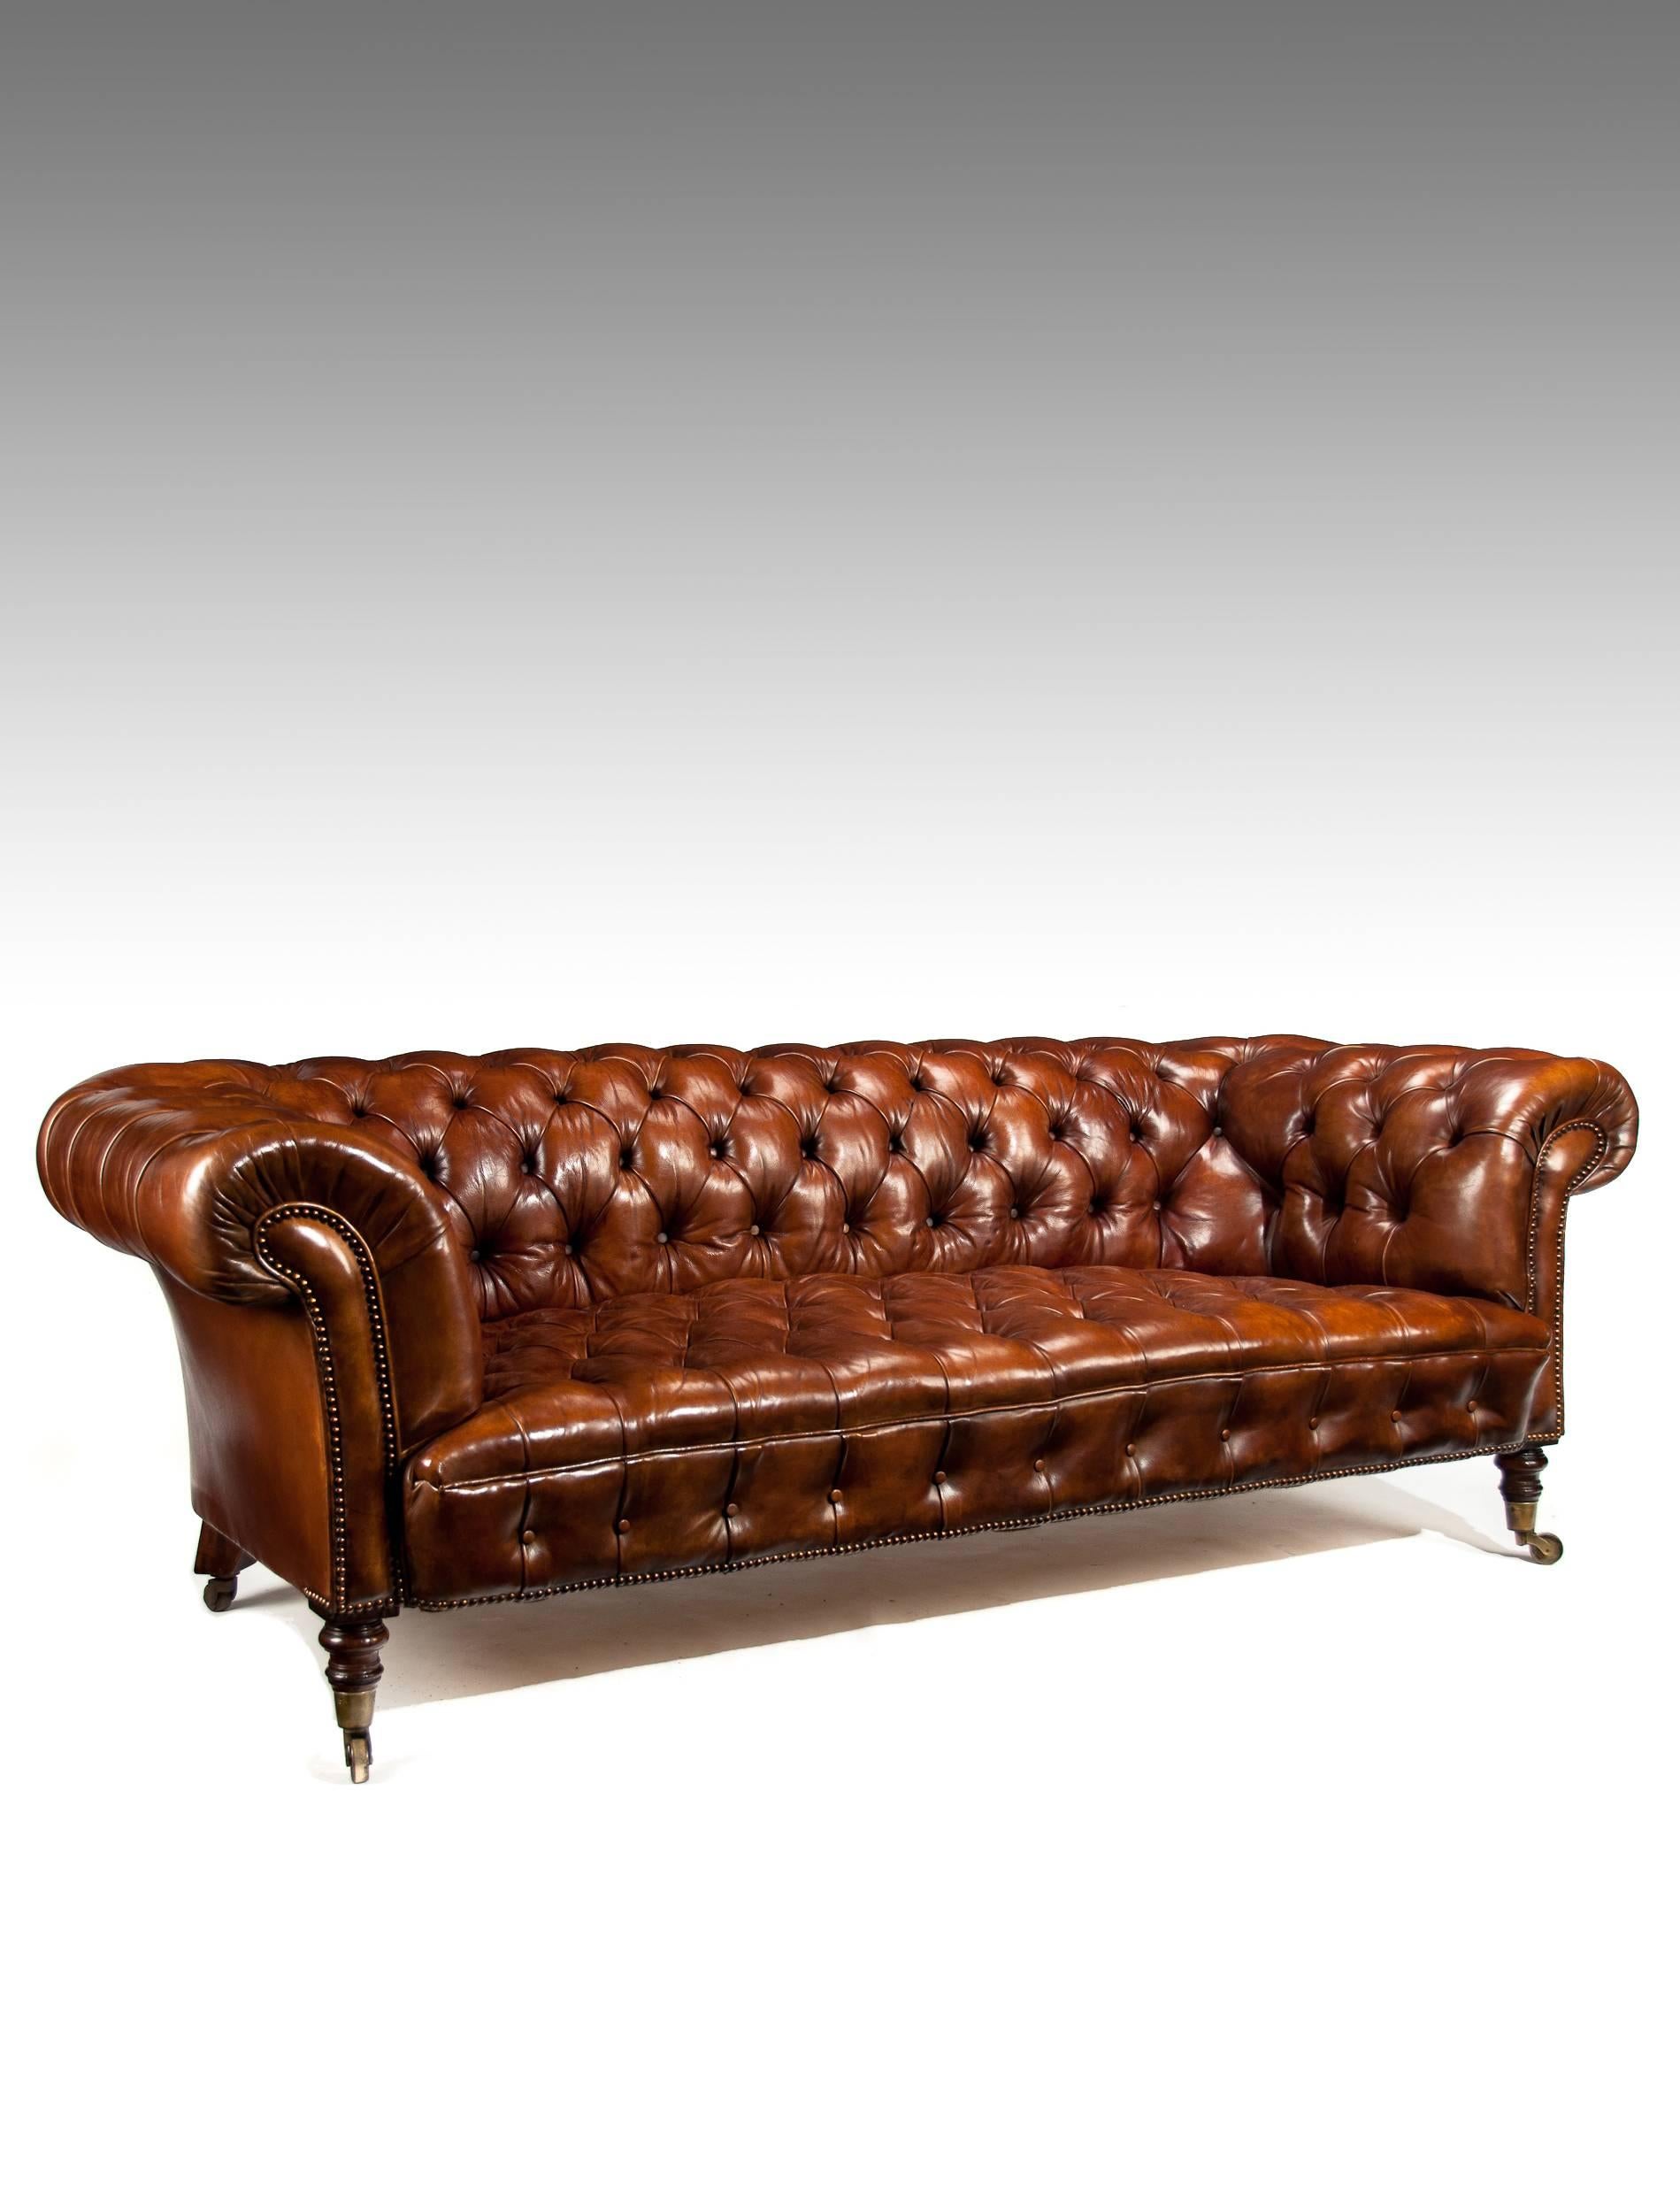 A very well drawn 19th century deep buttoned leather upholstered chesterfield on turned mahogany legs.
Having beautifully pronounced shaped scrolling arms and shaped breakfront edge this fine chesterfield has been recently upholstered in a very